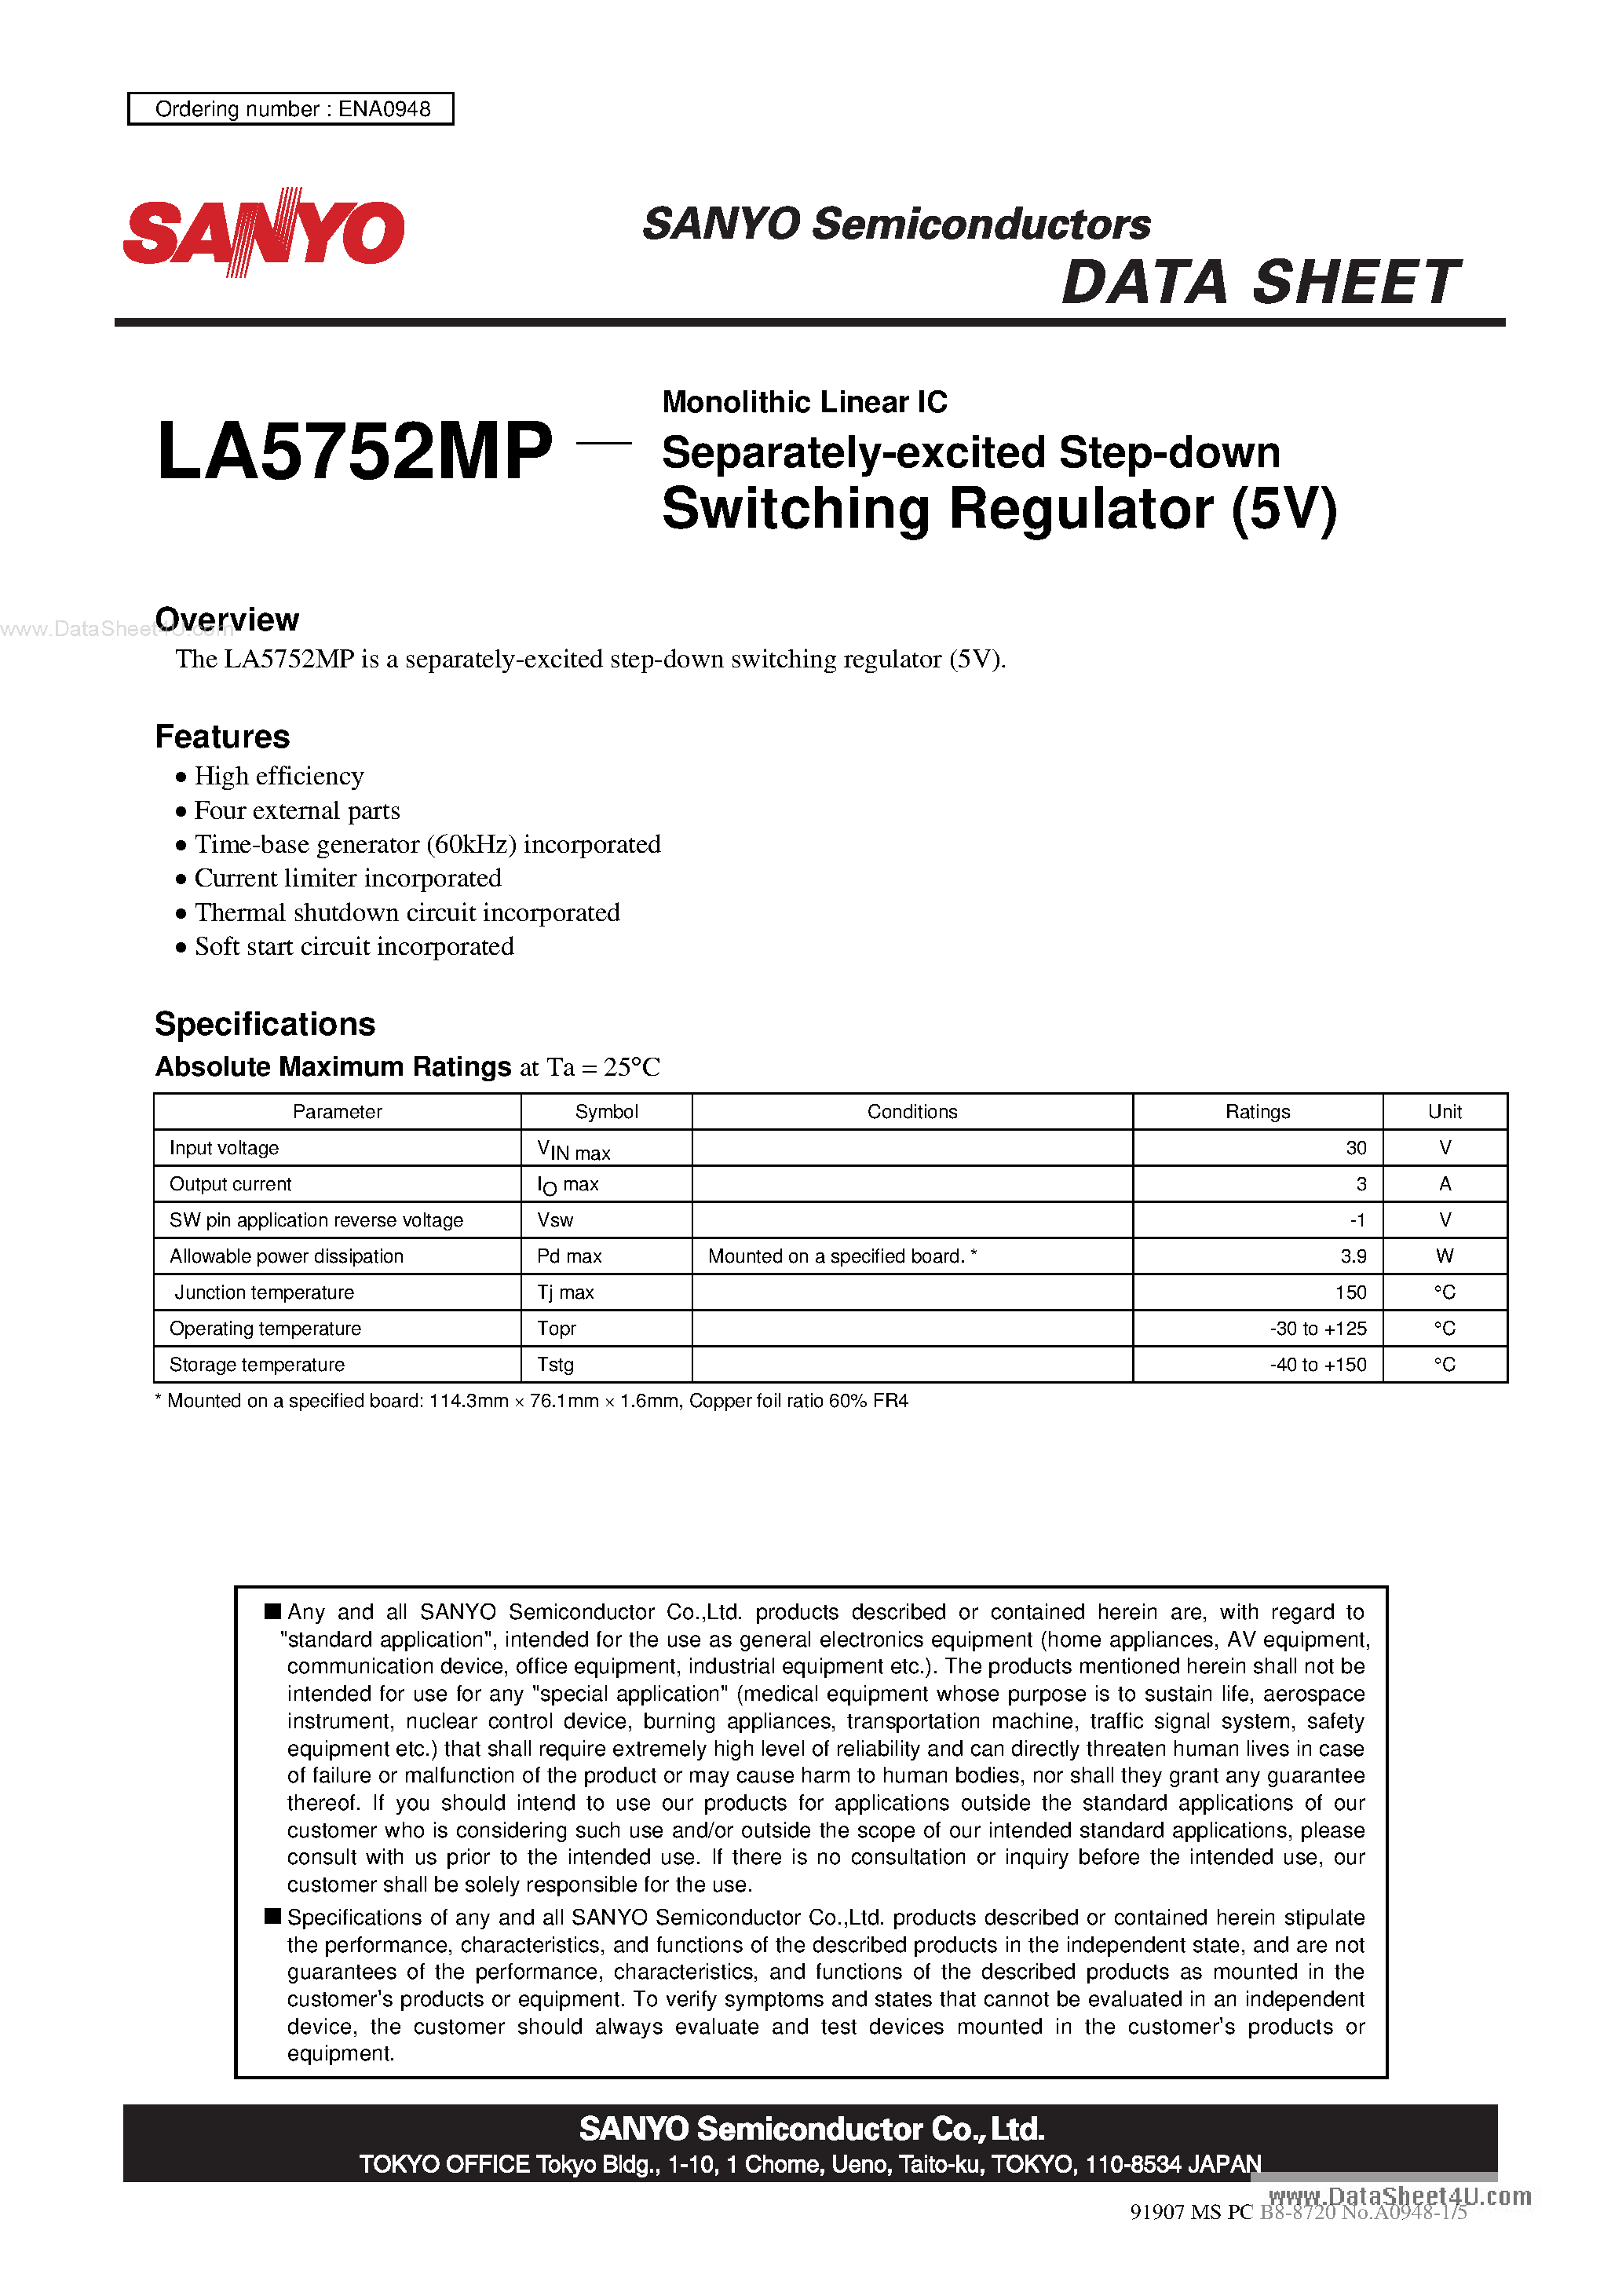 Даташит LA5752MP - Monolithic Linear IC Separately-Excited Step-Down Switching Regulator страница 1